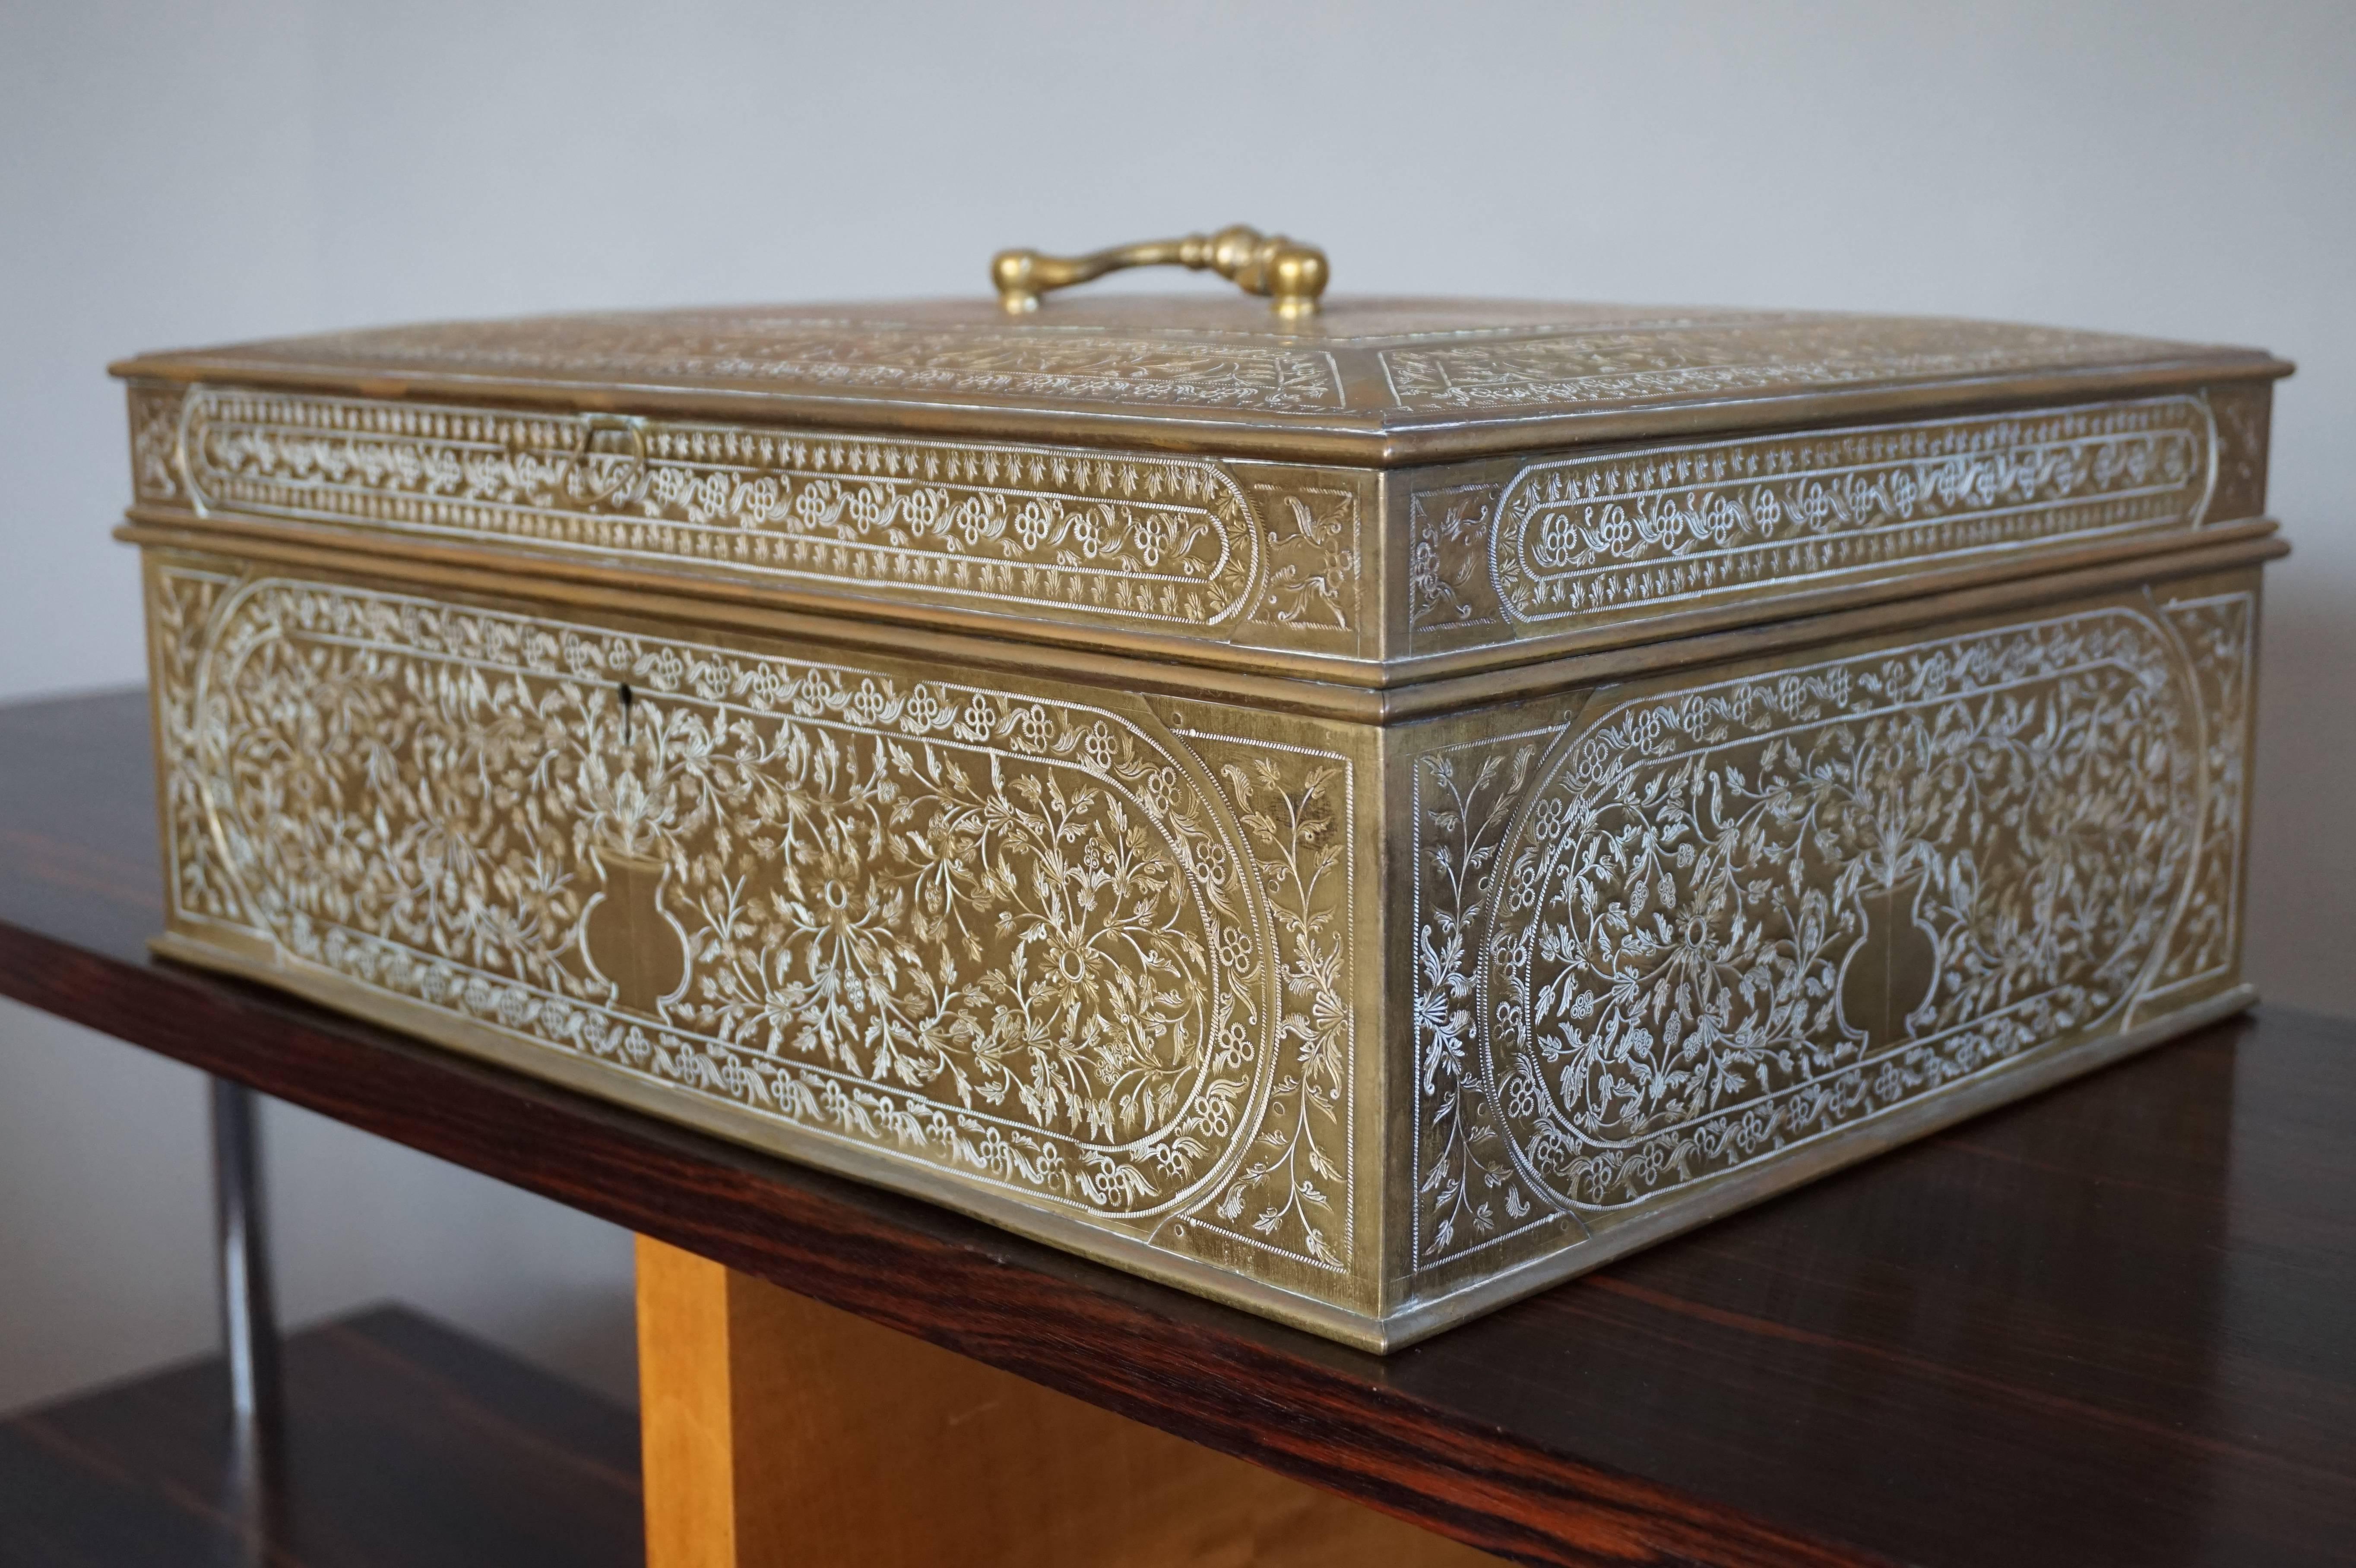 Unique 19th Century Embossed Brass Box of Yellow Metal by P.H. Muntz's 1872 3